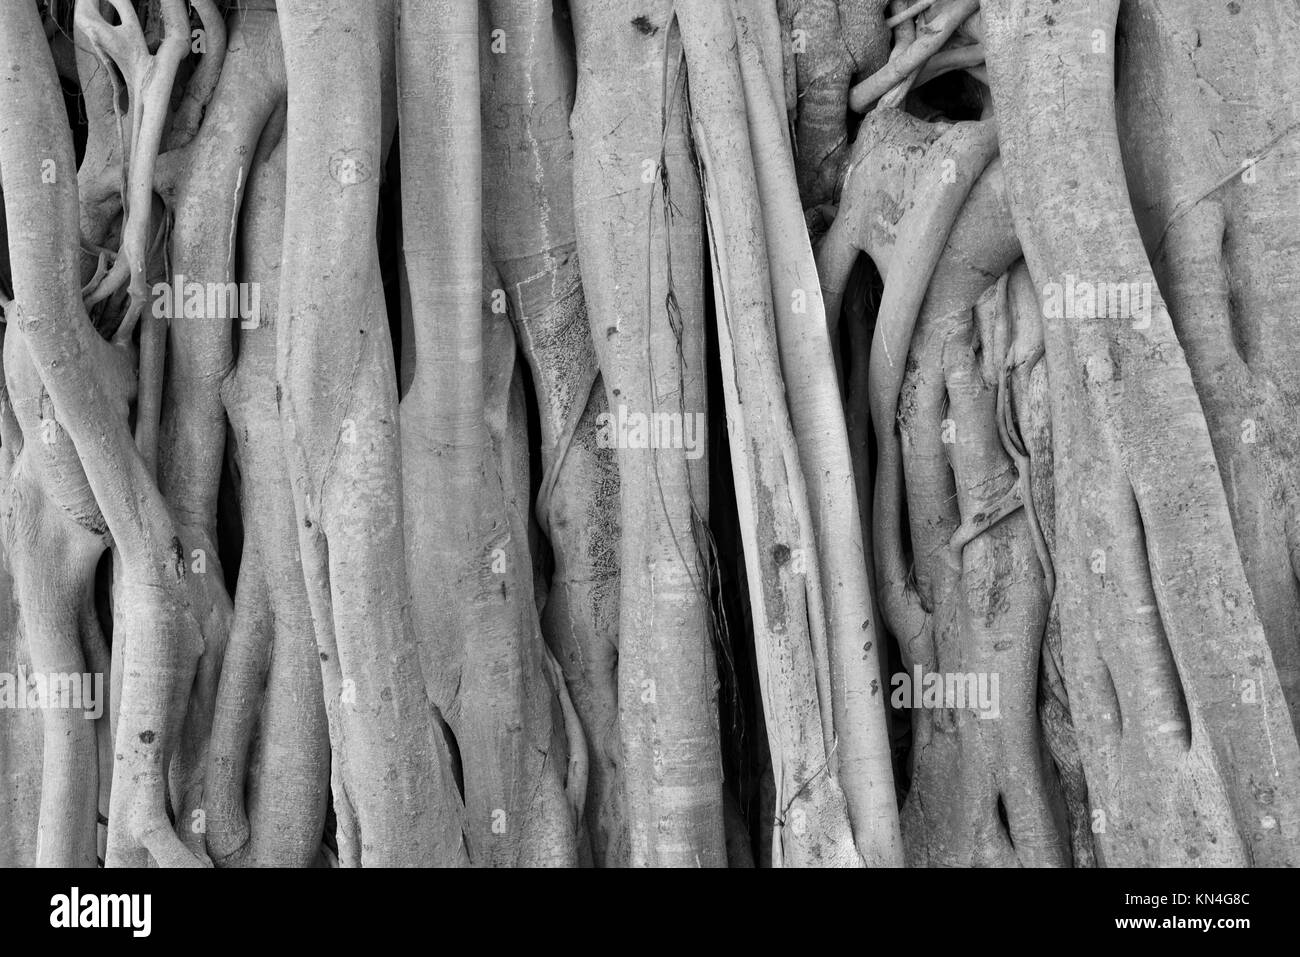 Trunk of fig tree showing the intricate patterns these trees make as they grow ever increasing root systems, Townsville, Queensland, Australia Stock Photo